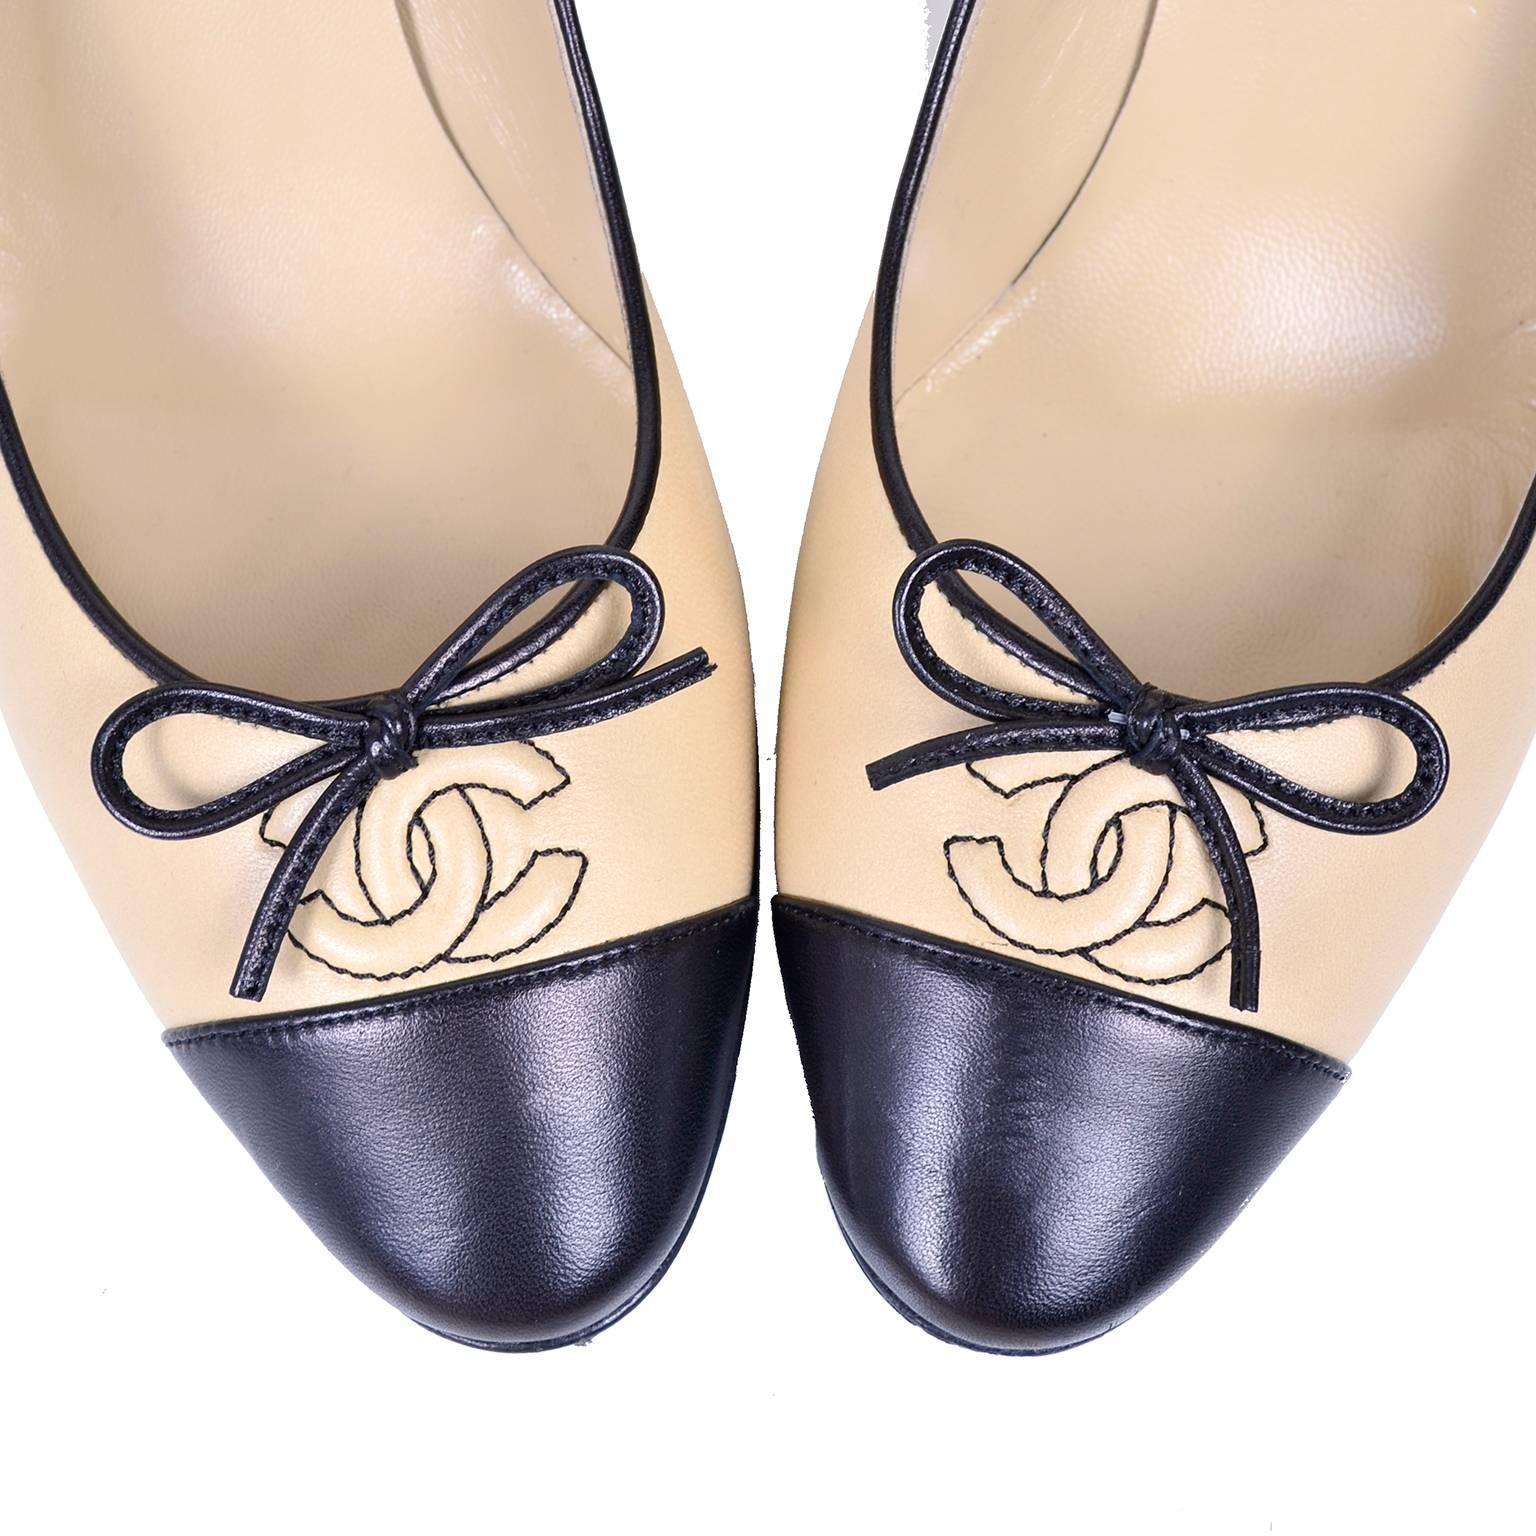 chanel pumps beige and black